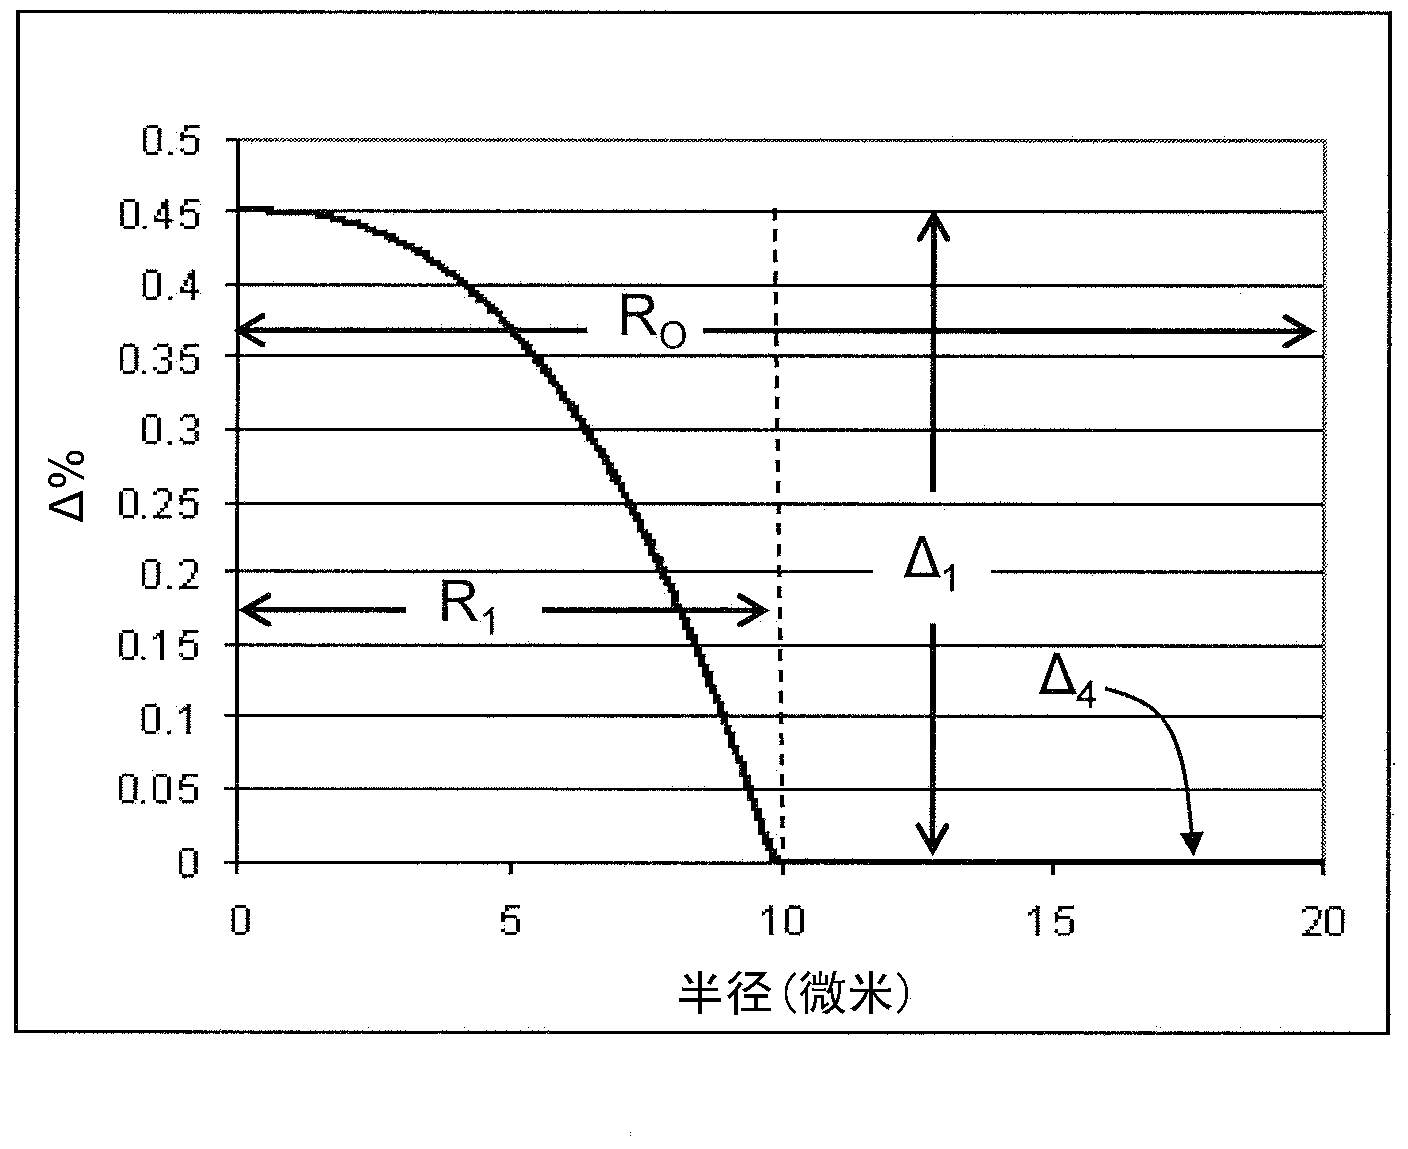 Few mode optical fibers for mode division multiplexing